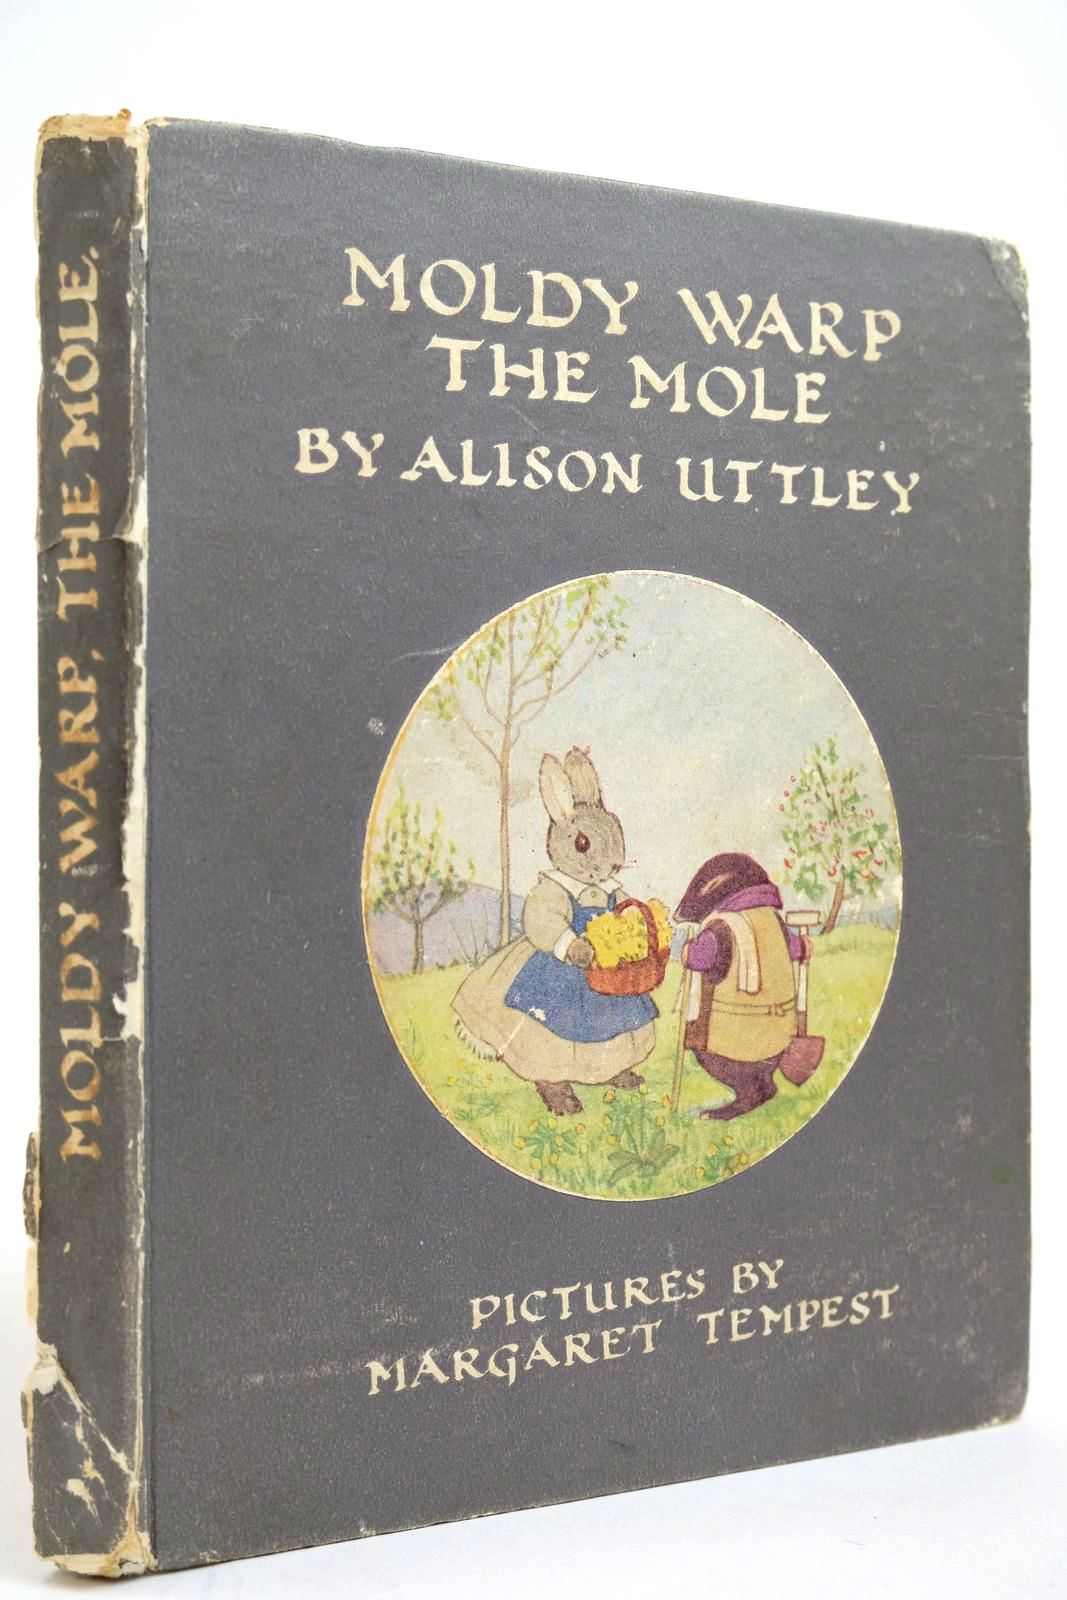 Photo of MOLDY WARP THE MOLE written by Uttley, Alison illustrated by Tempest, Margaret published by Collins (STOCK CODE: 2135088)  for sale by Stella & Rose's Books